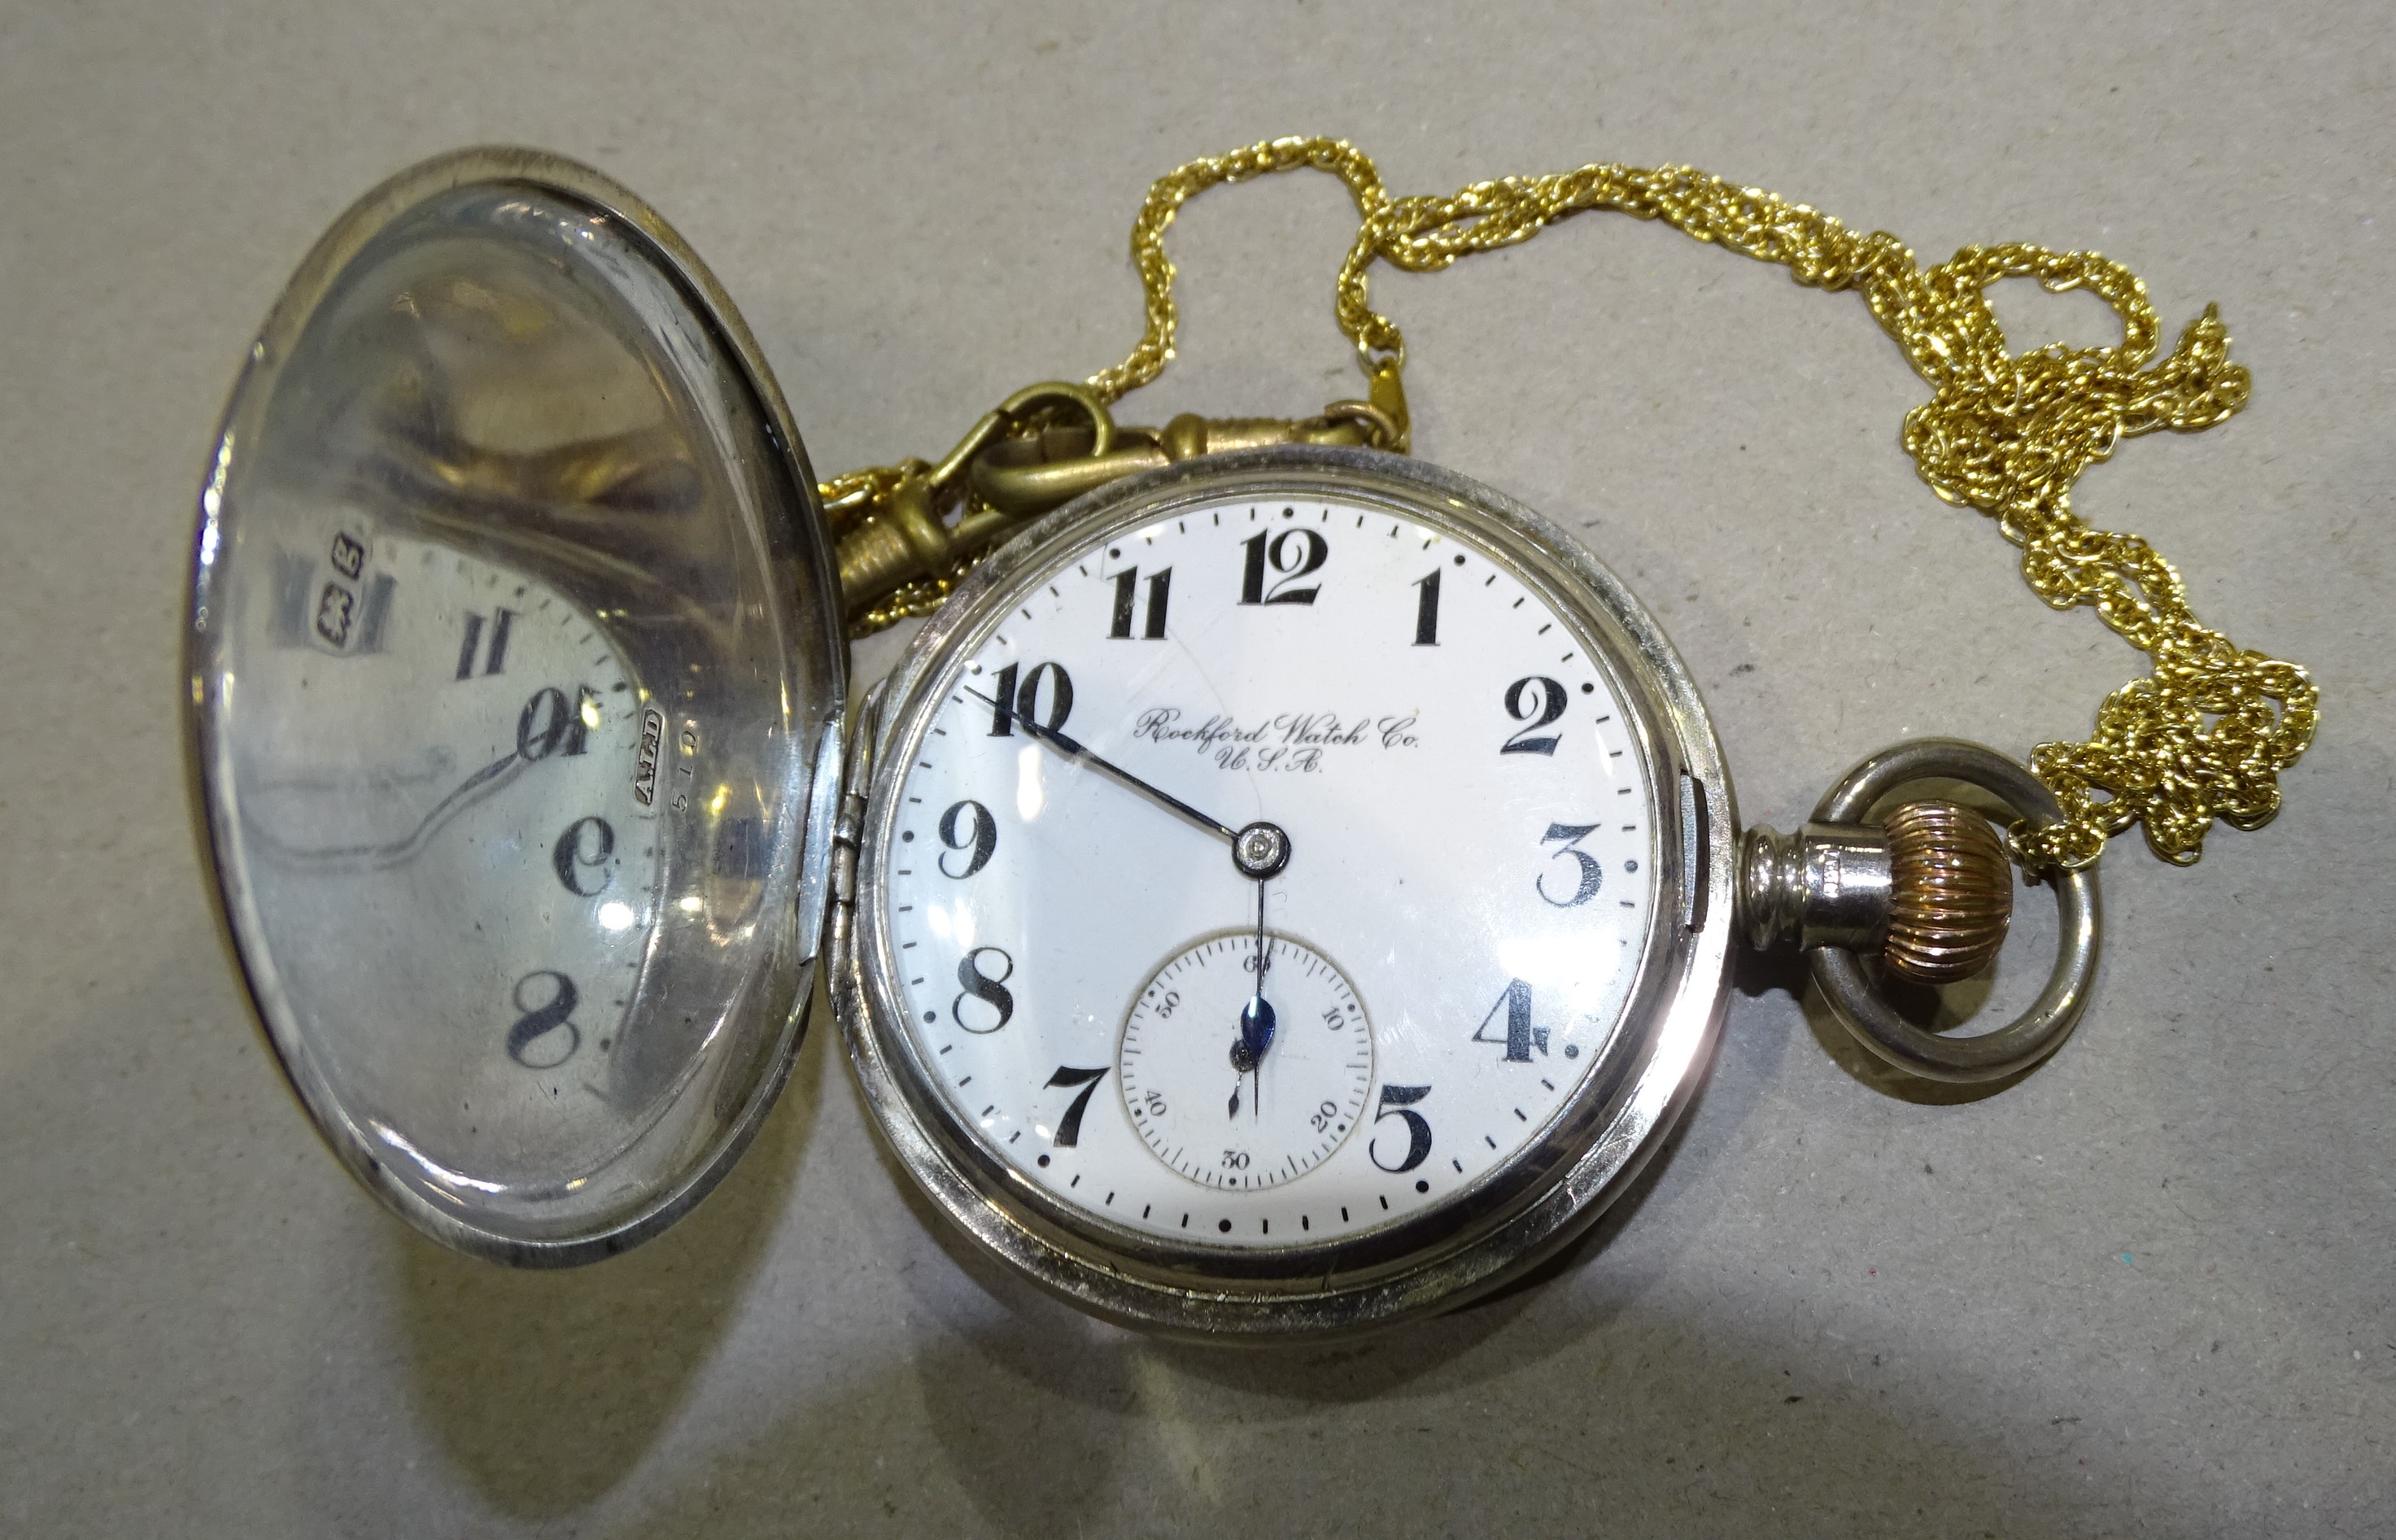 A silver hunter-cased keyless pocket watch, the white enamel dial signed Rockford Watch Co. USA, the